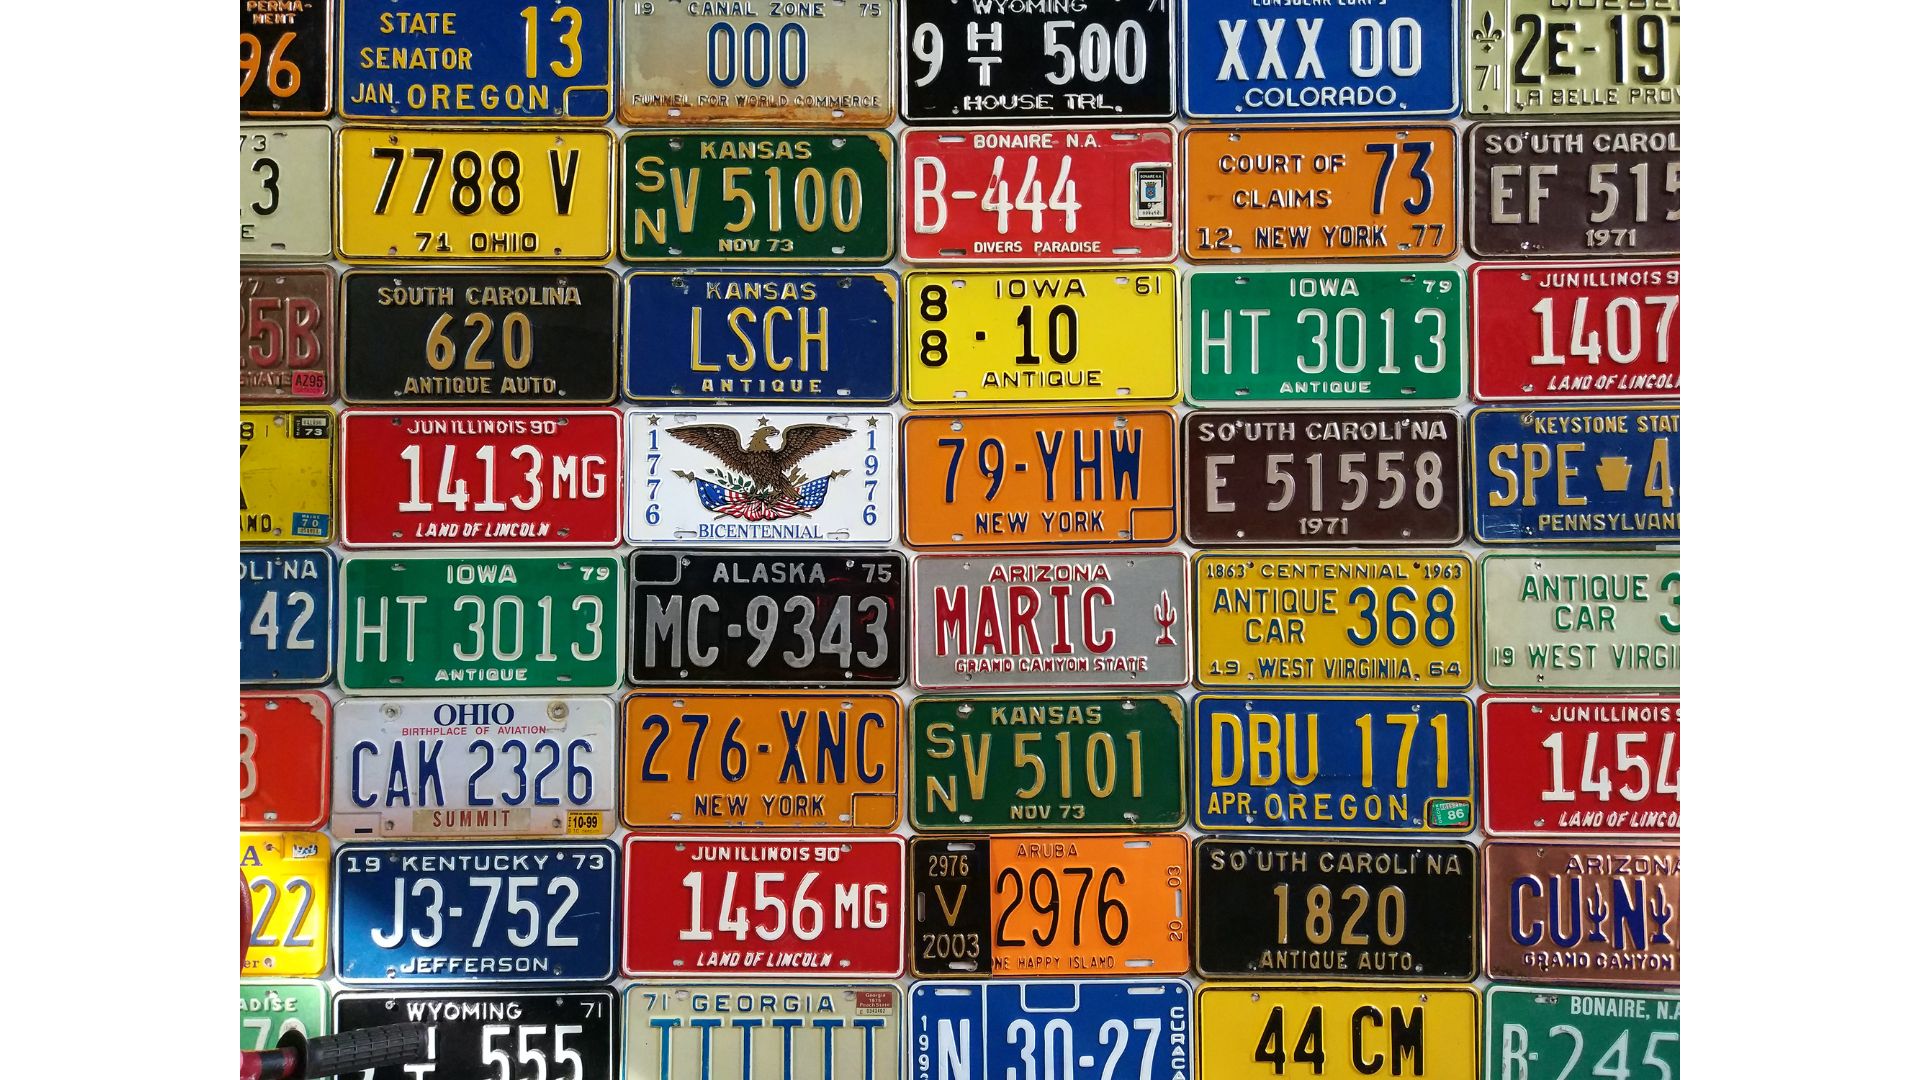 do you have to return ohio license plates